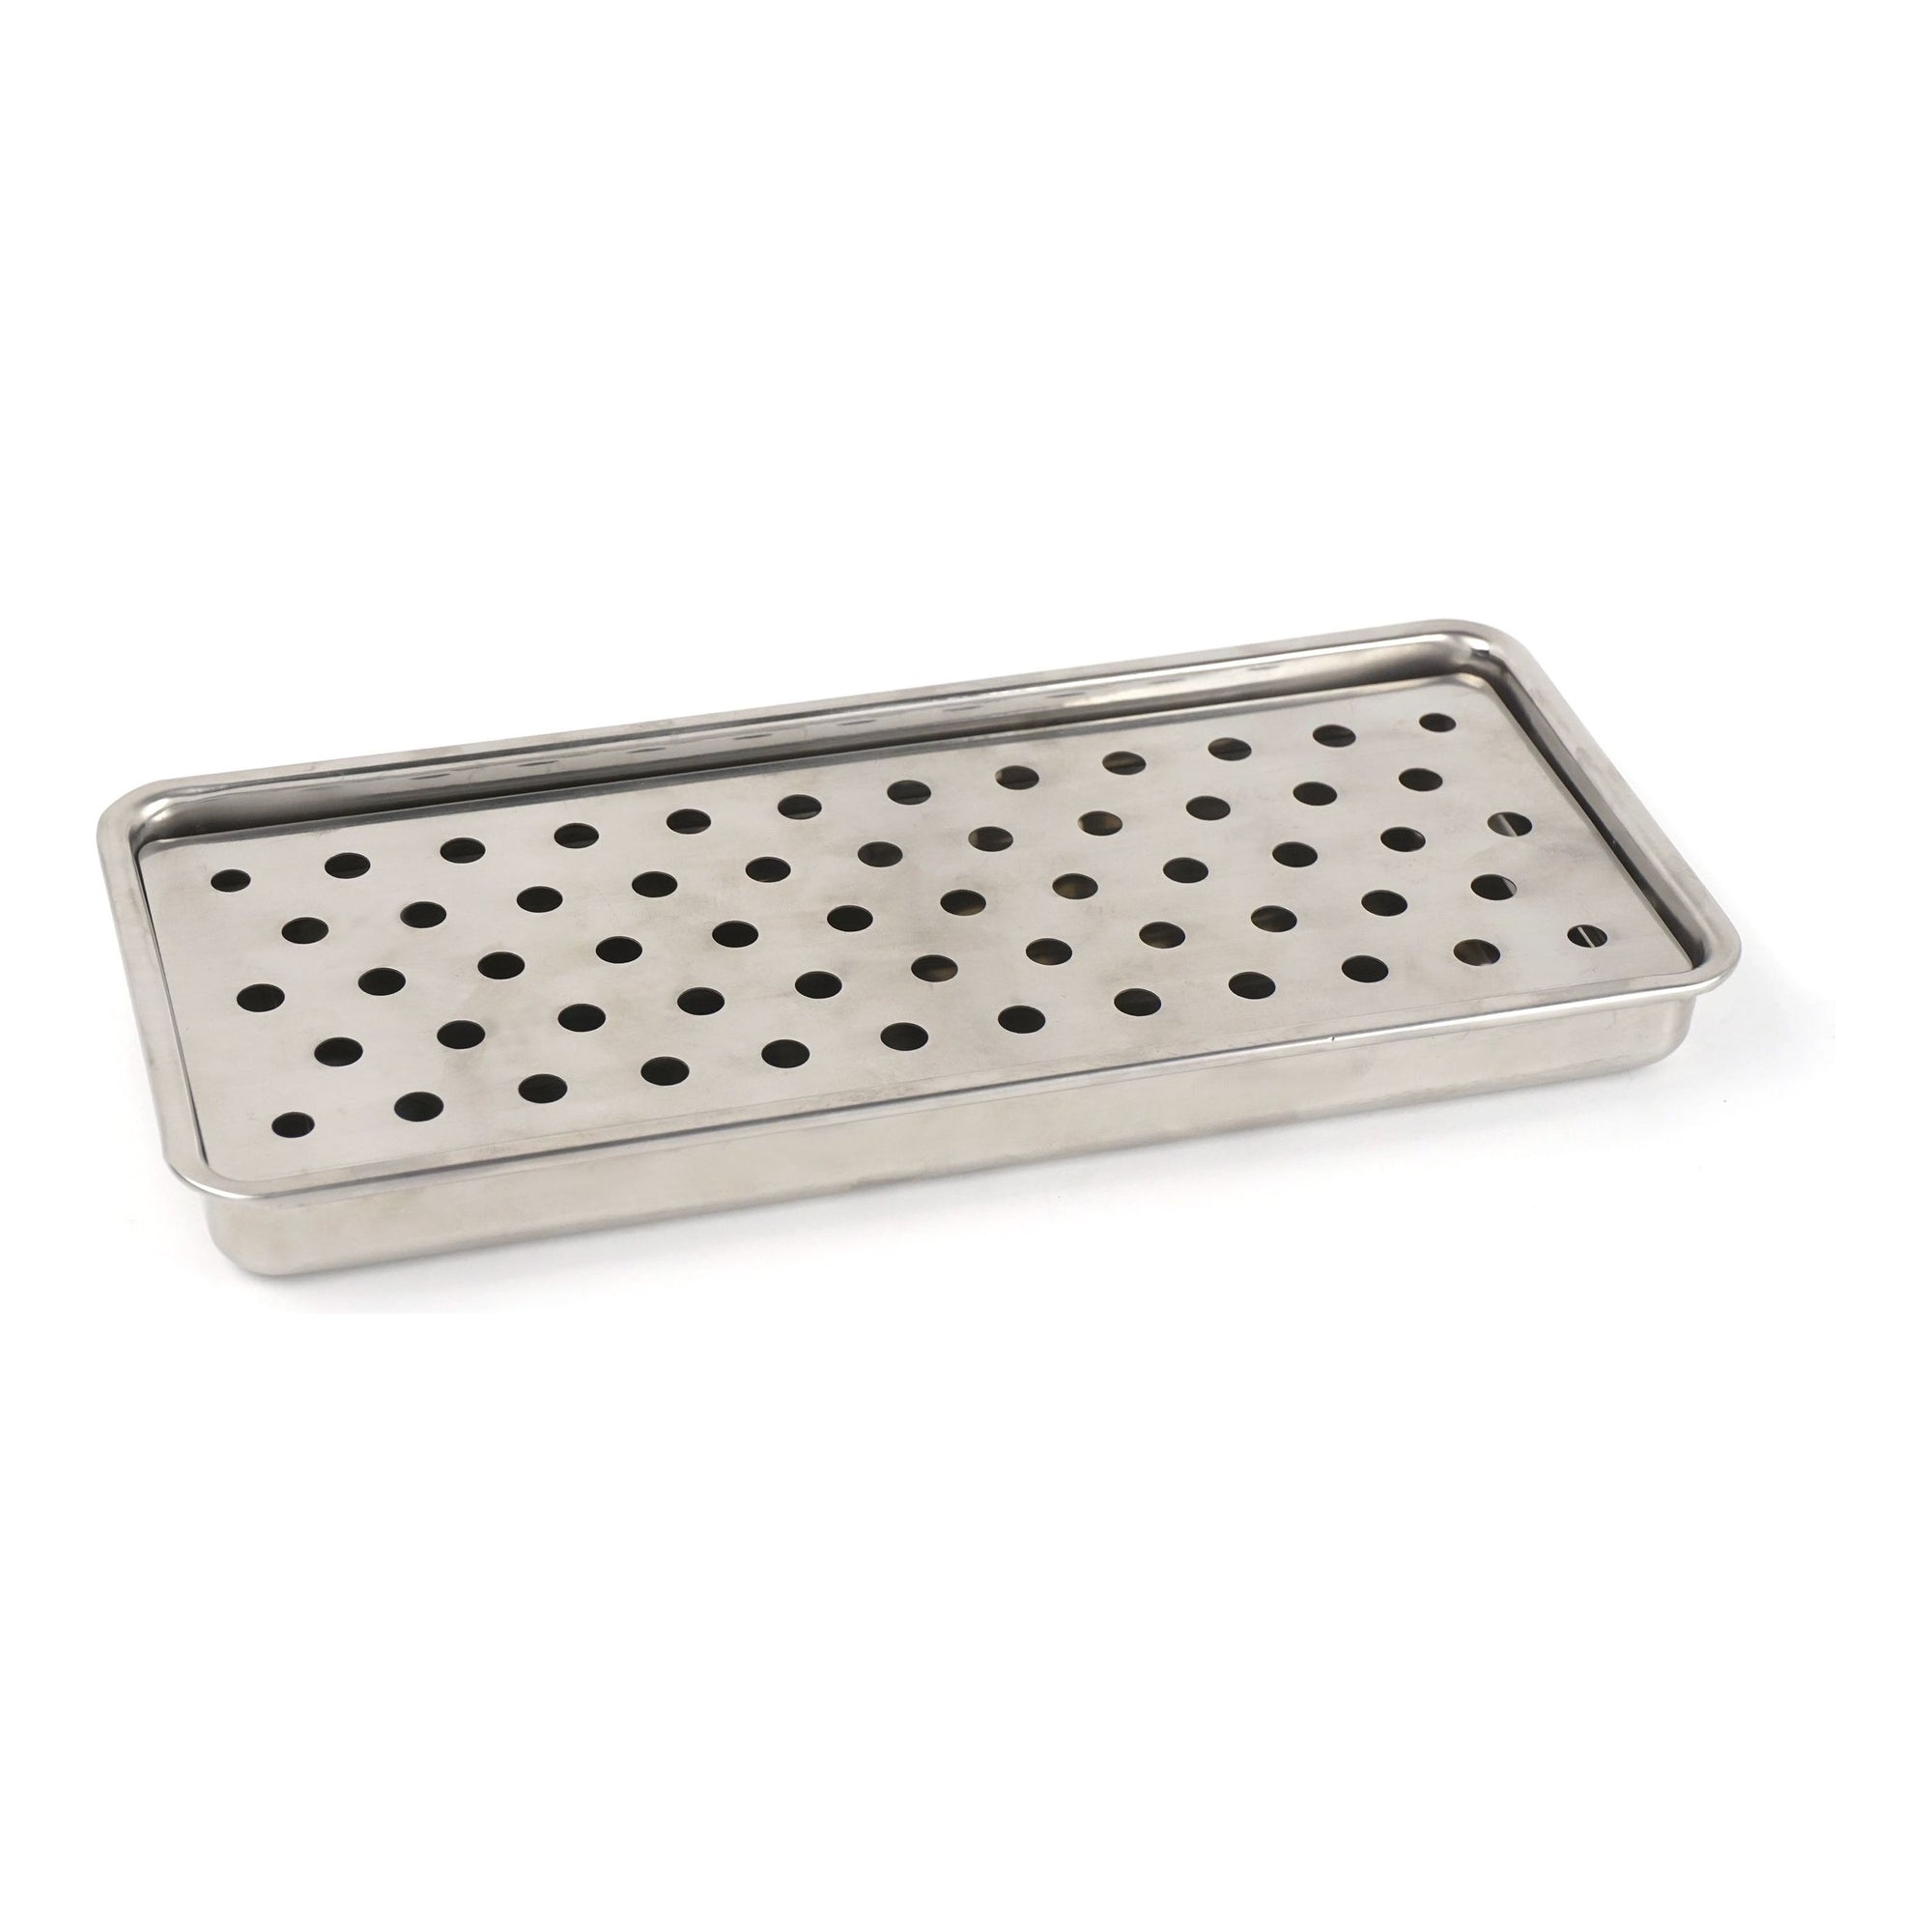 Stainless Steel Soap Dish - Large - Urban Naturals